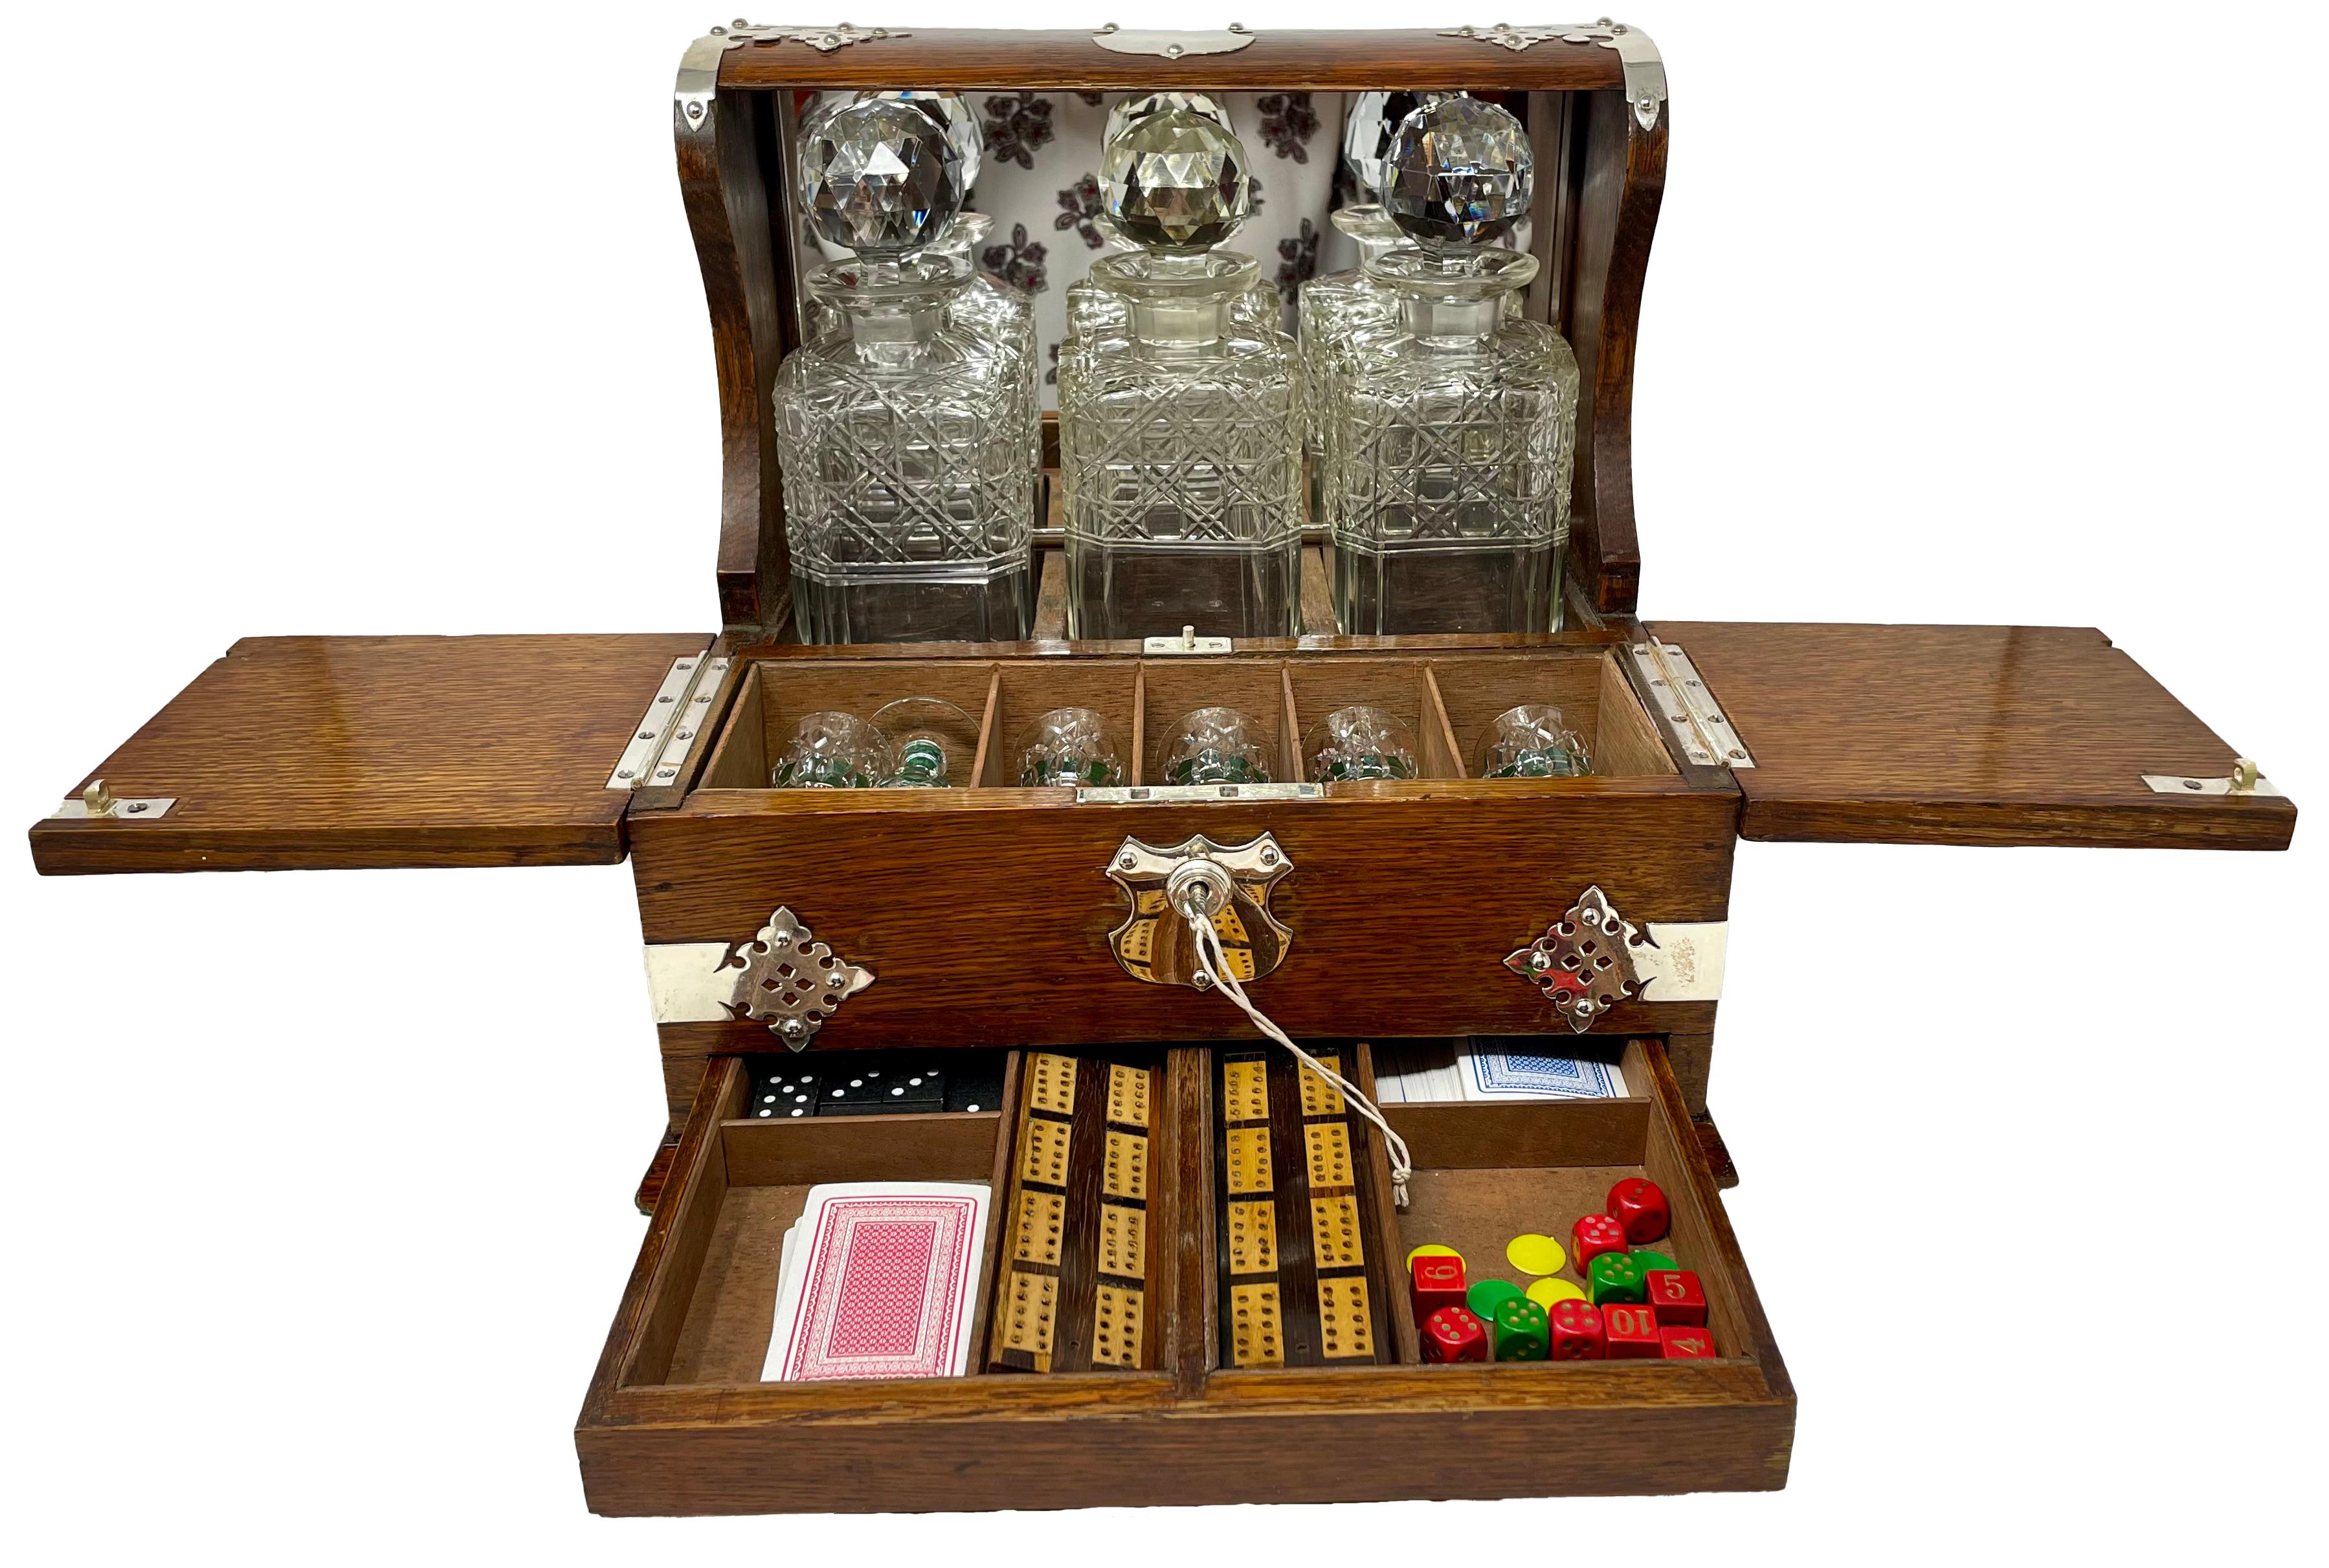 Antique English Silver Plate Mounted Oak Tantalus and Games Compendium Box with 3 Cut Crystal Liquor Bottles, 6 Cordials and Multiple Games.
Closed: 13.25